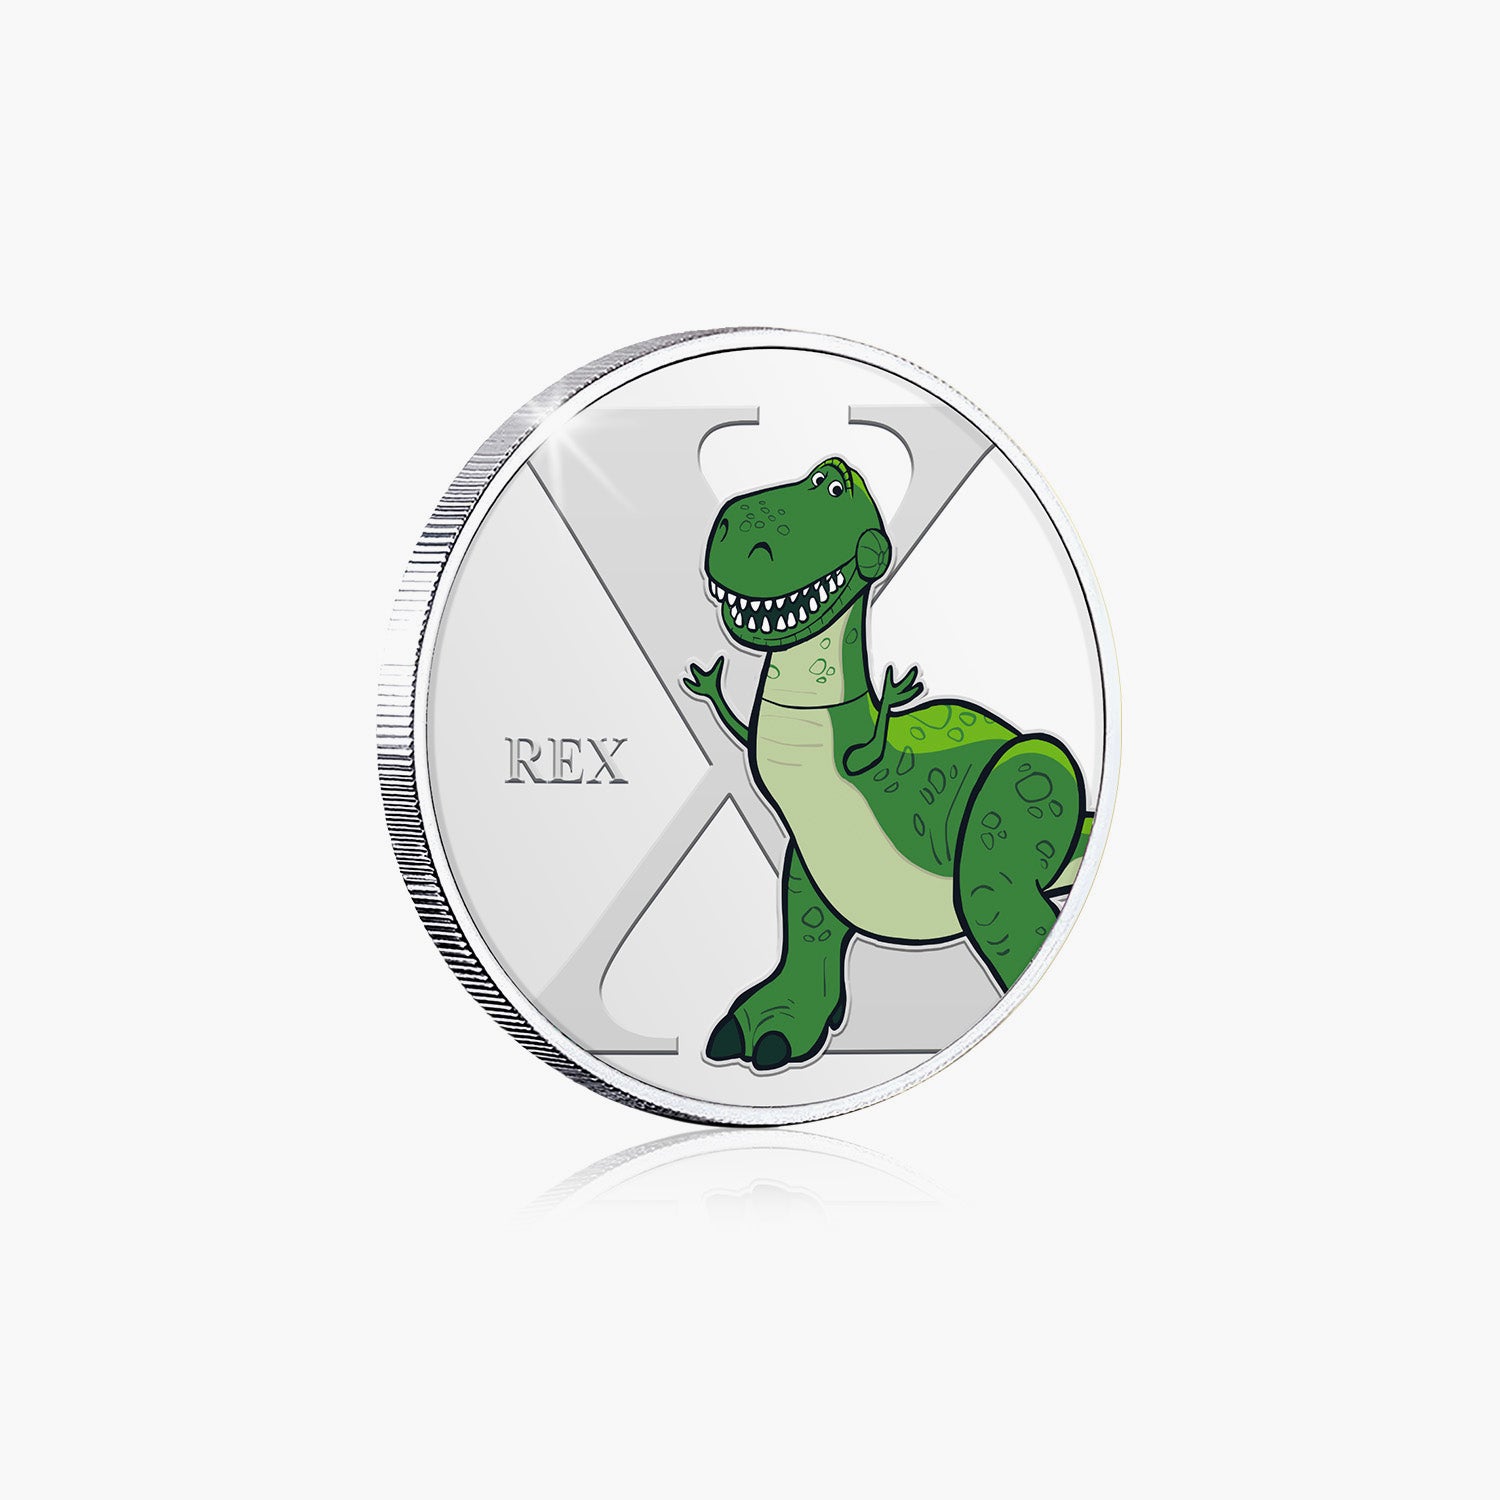 X is for Rex Silver-Plated Full Colour Commemorative